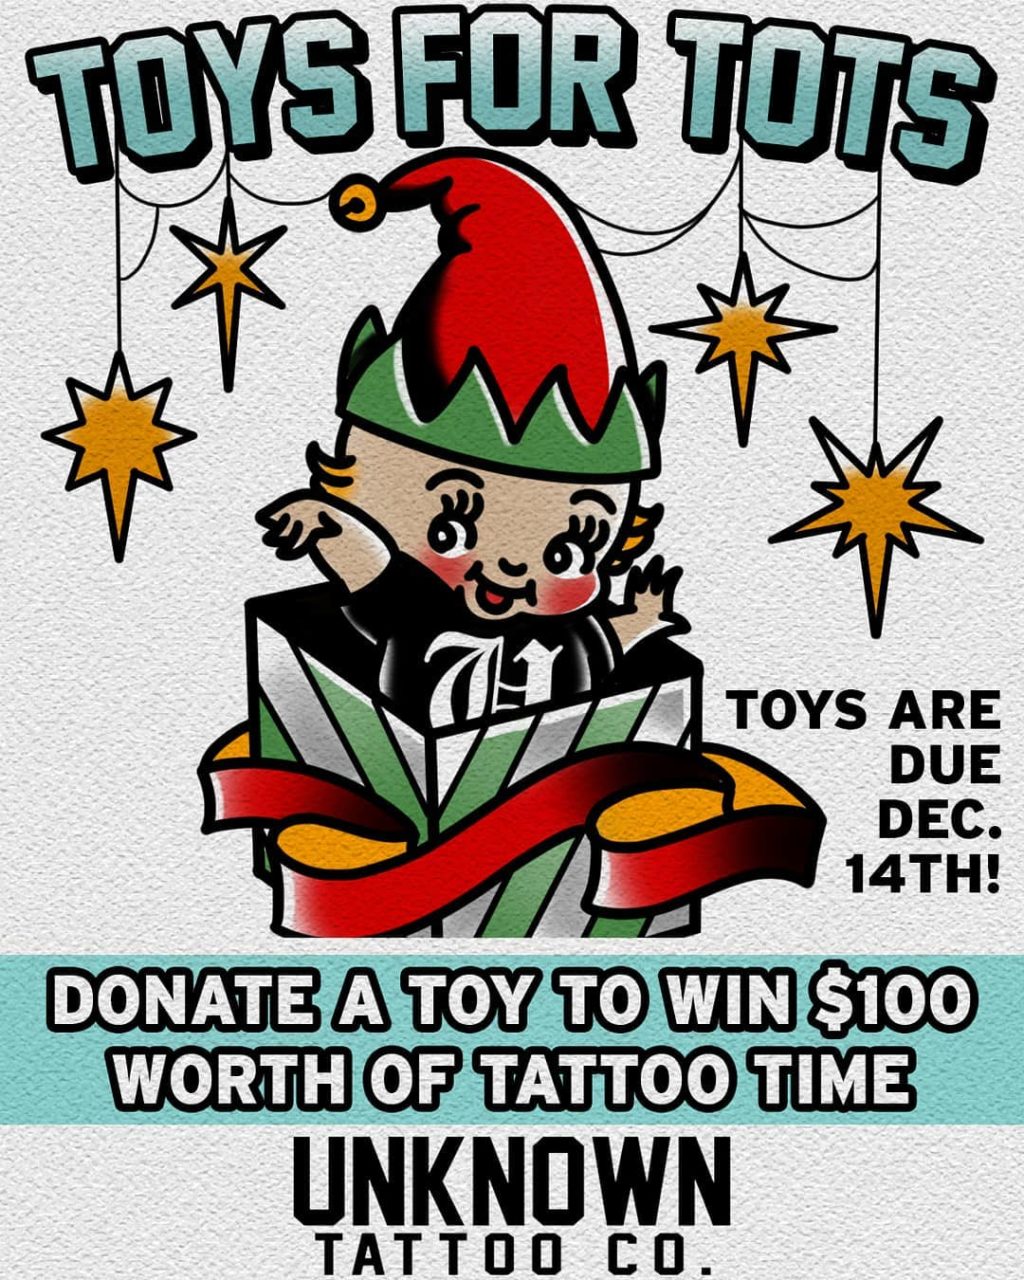 Toys for Tots event at Unknown Tattoo Co in Everett Washington